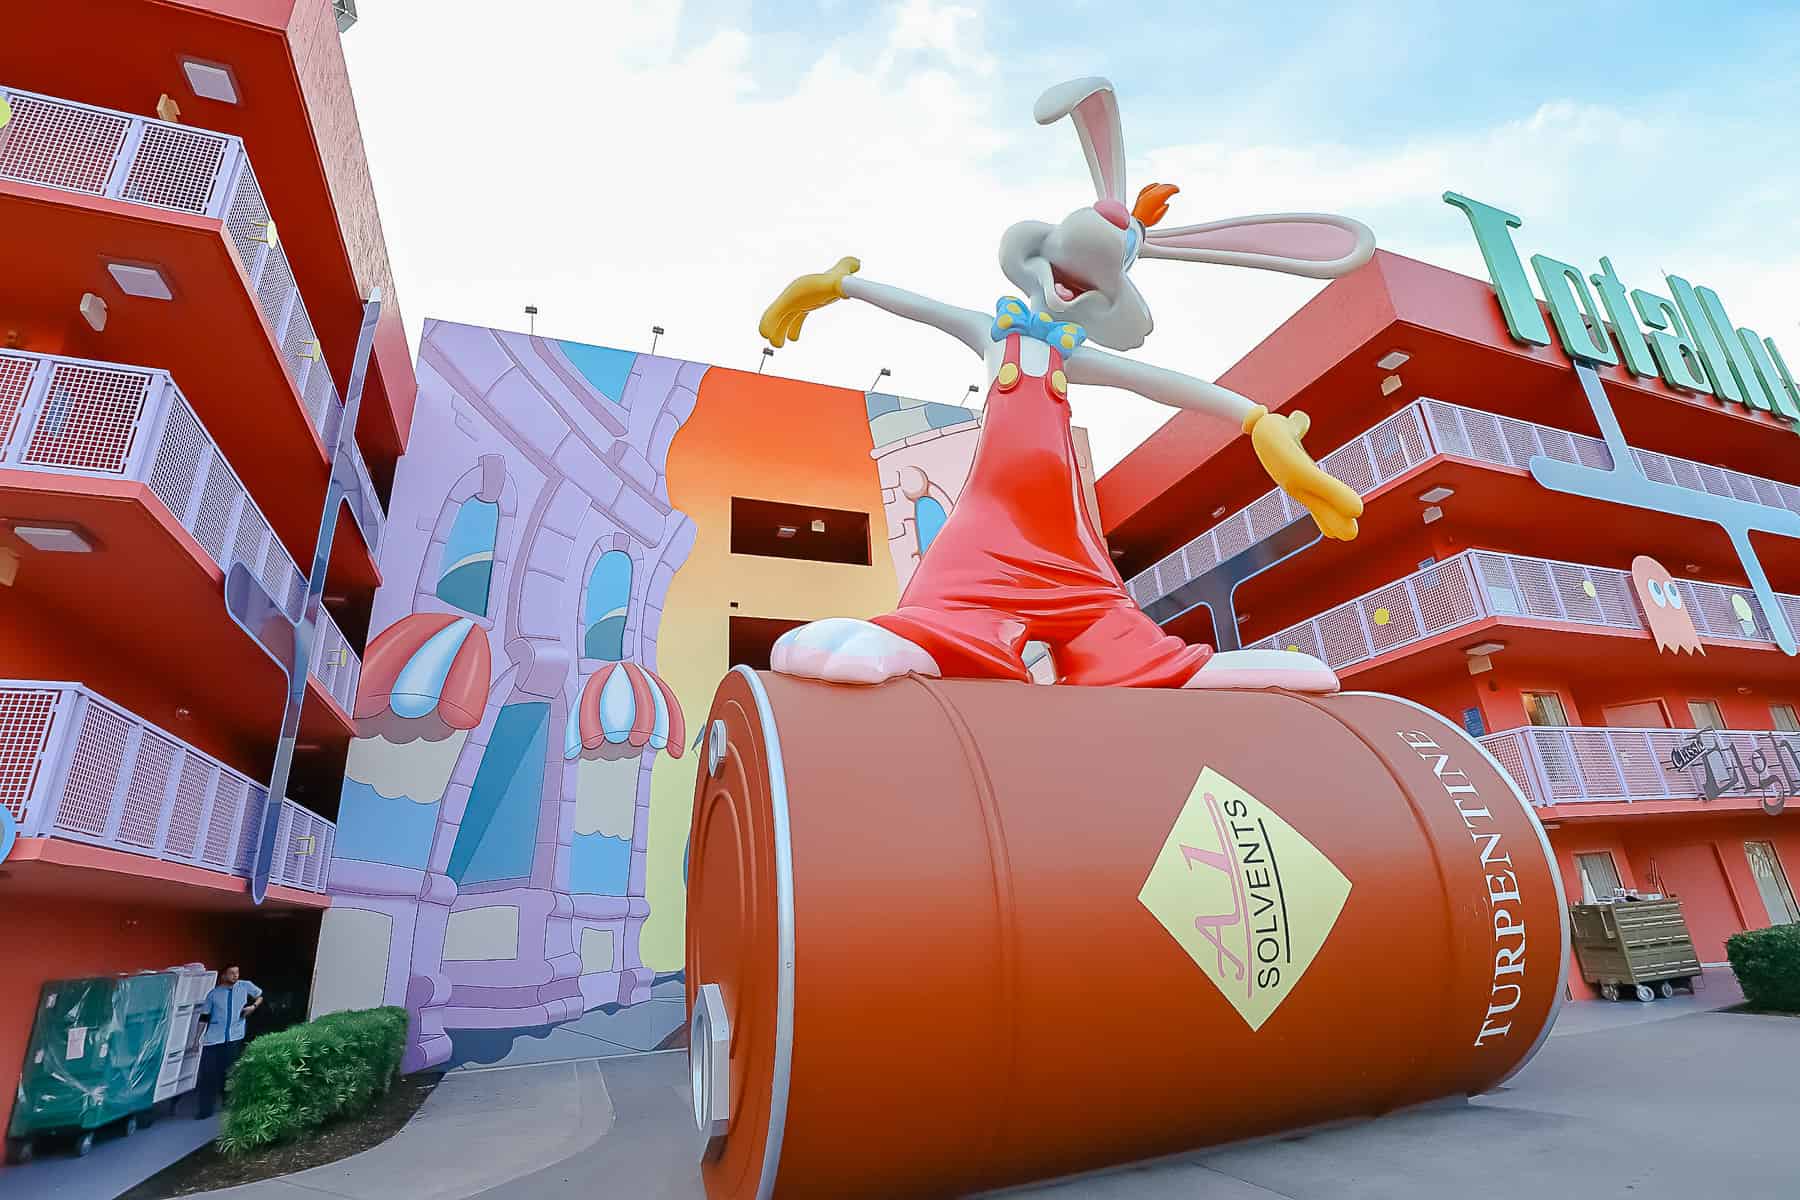 Roger Rabbit towers over the 80s section of Pop Century. 